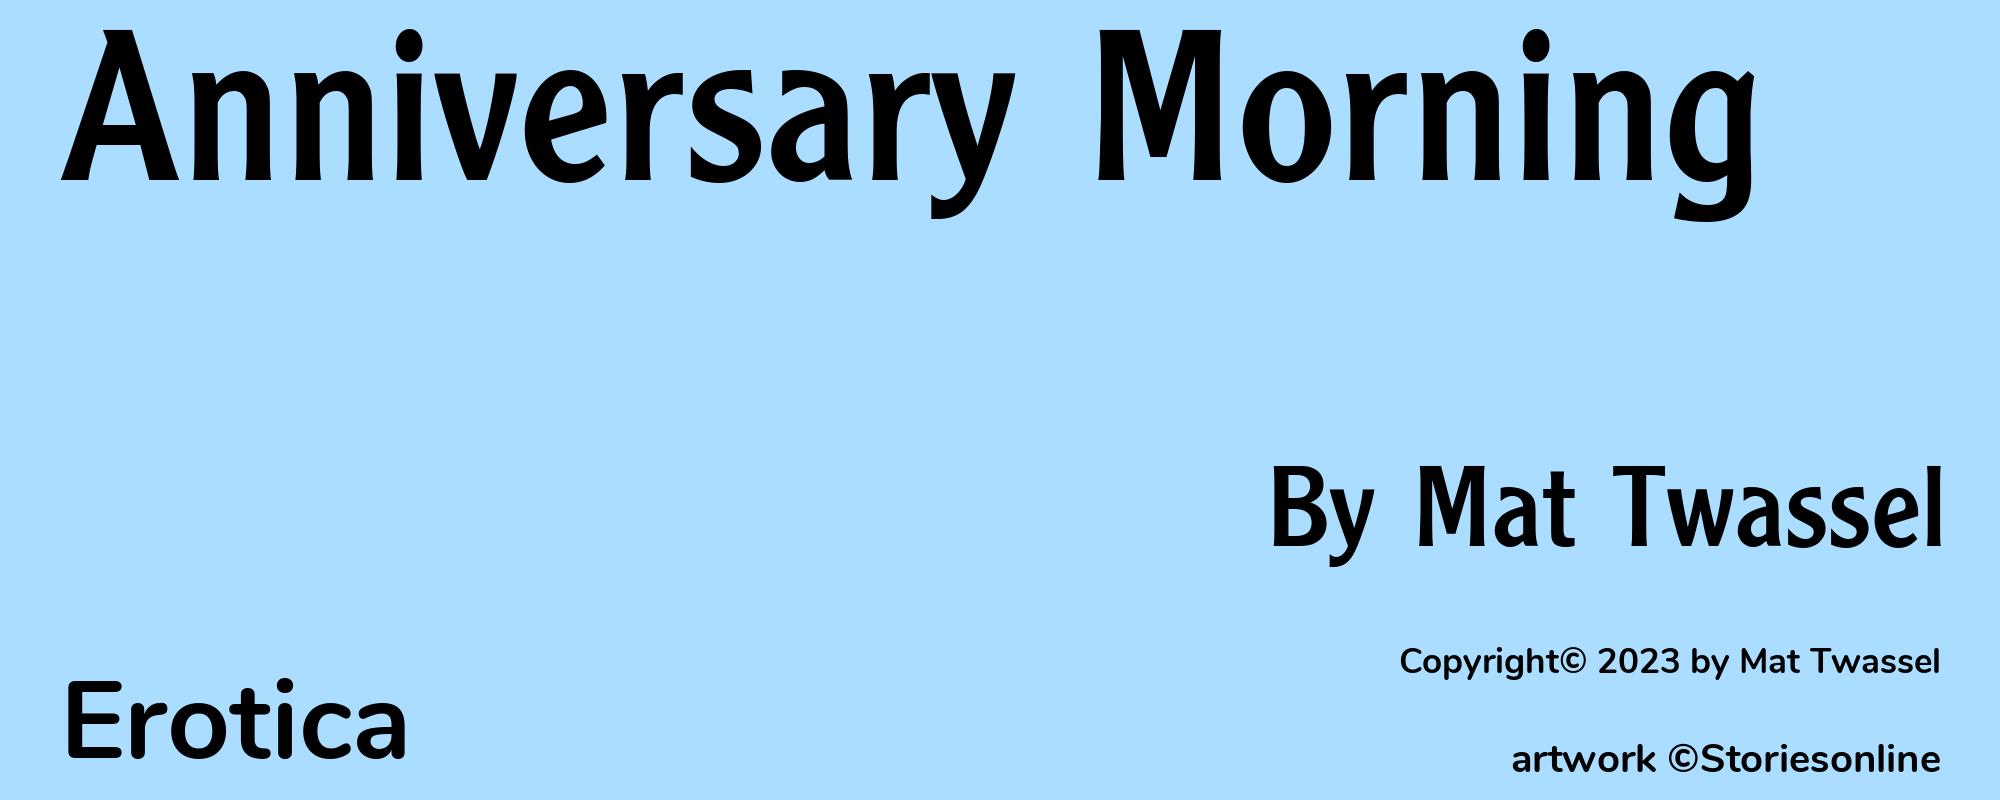 Anniversary Morning - Cover